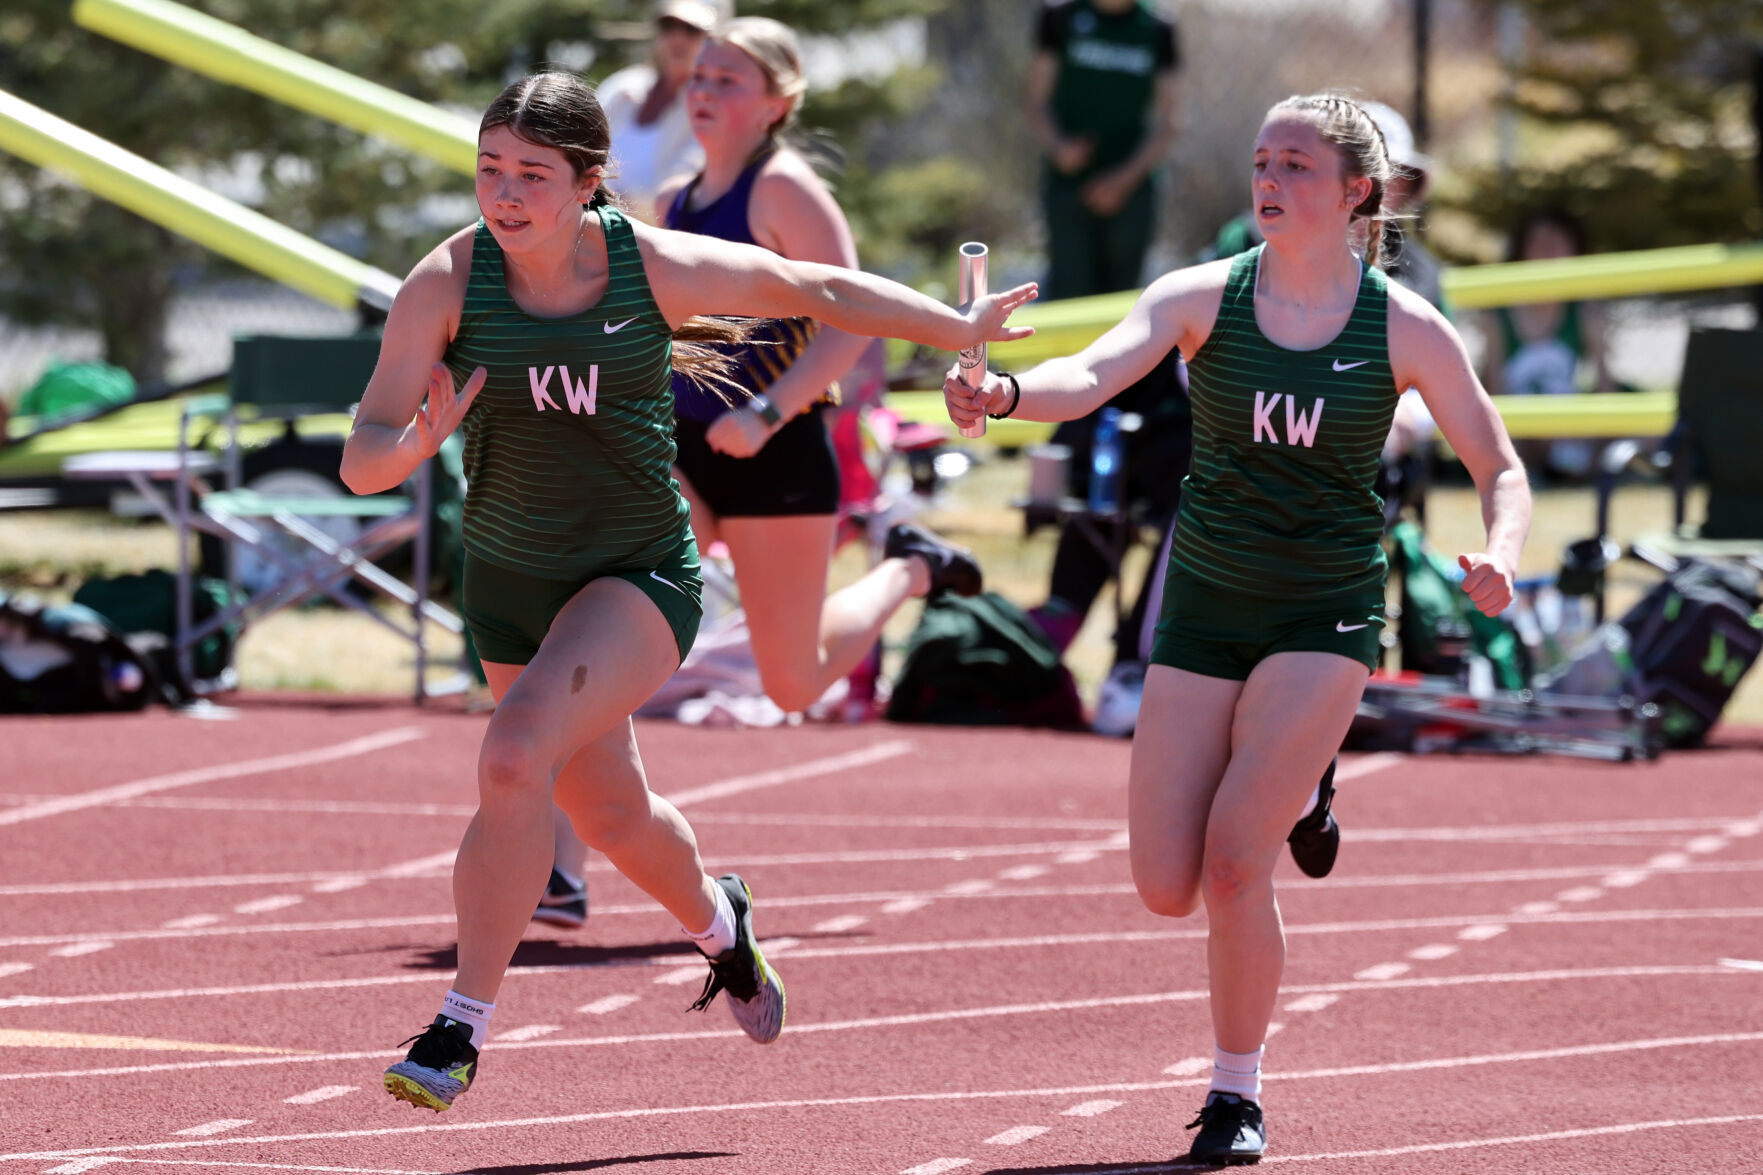 Wyoming State Championships Weekend: Kelly Walsh and Natrona County Teams Ready for Glory